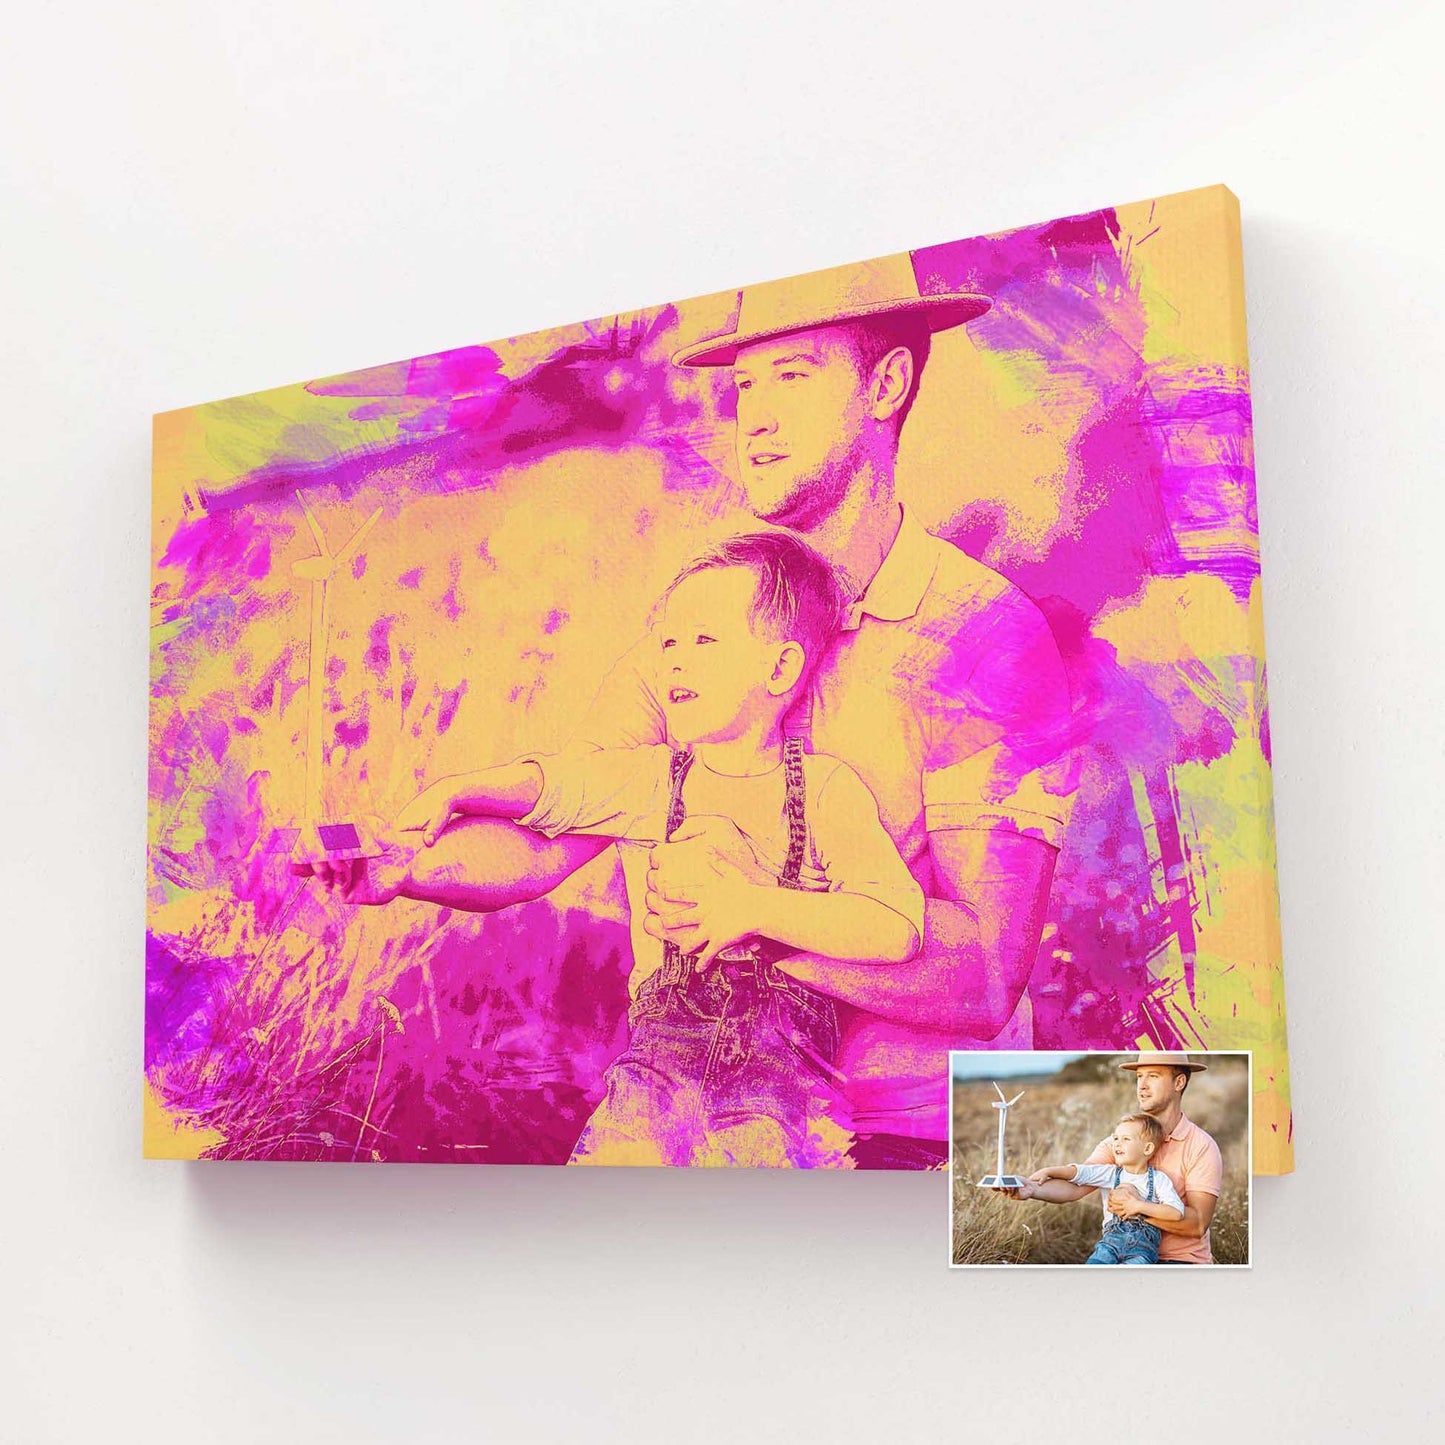 Add a touch of elegance to your space with our Personalised Pink & Yellow Painting Canvas. Created using the finest watercolor techniques, this painting from photo captures every intricate detail with graceful brush strokes